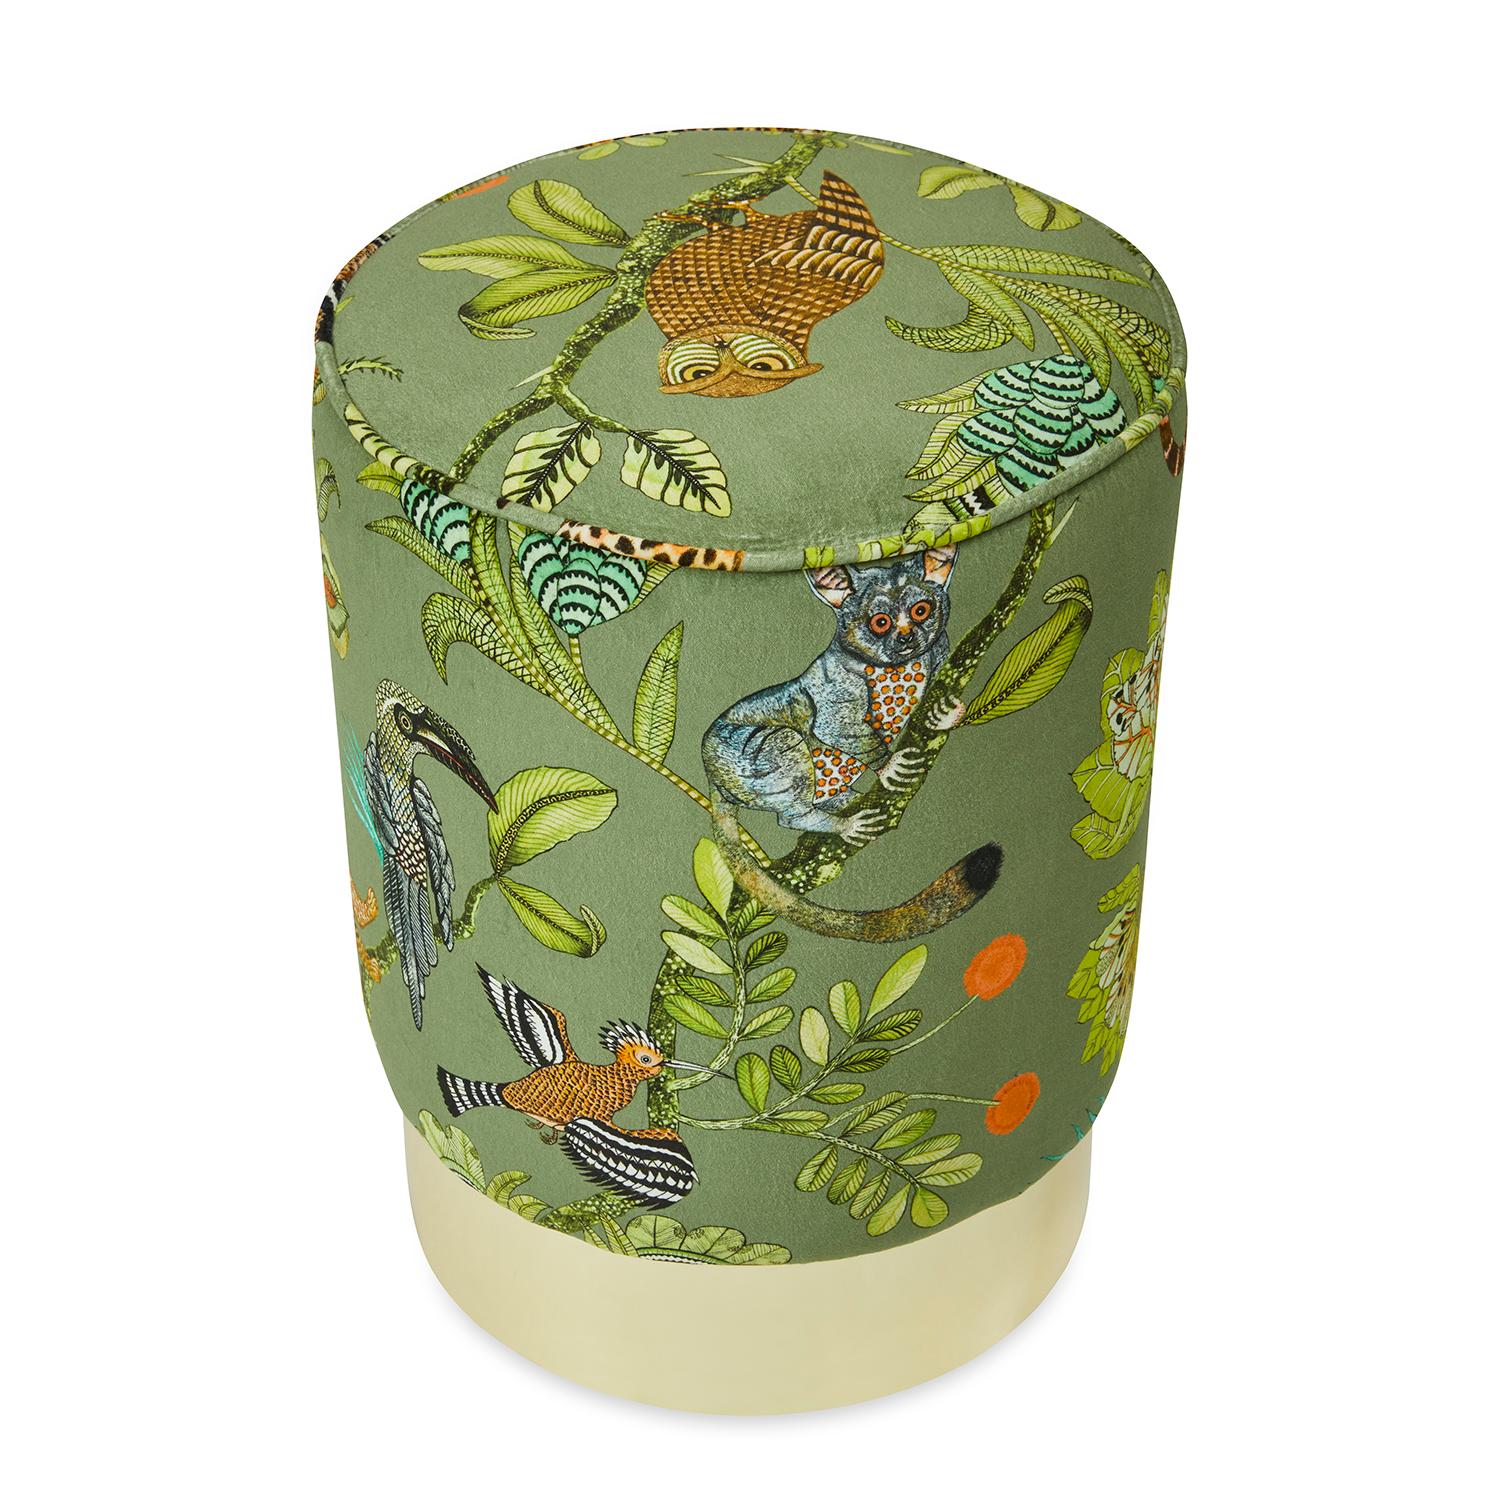 A luxurious Camp Critters Velvet Fabric covered Pouff with a brass base.

Product information
Dimensions: 15